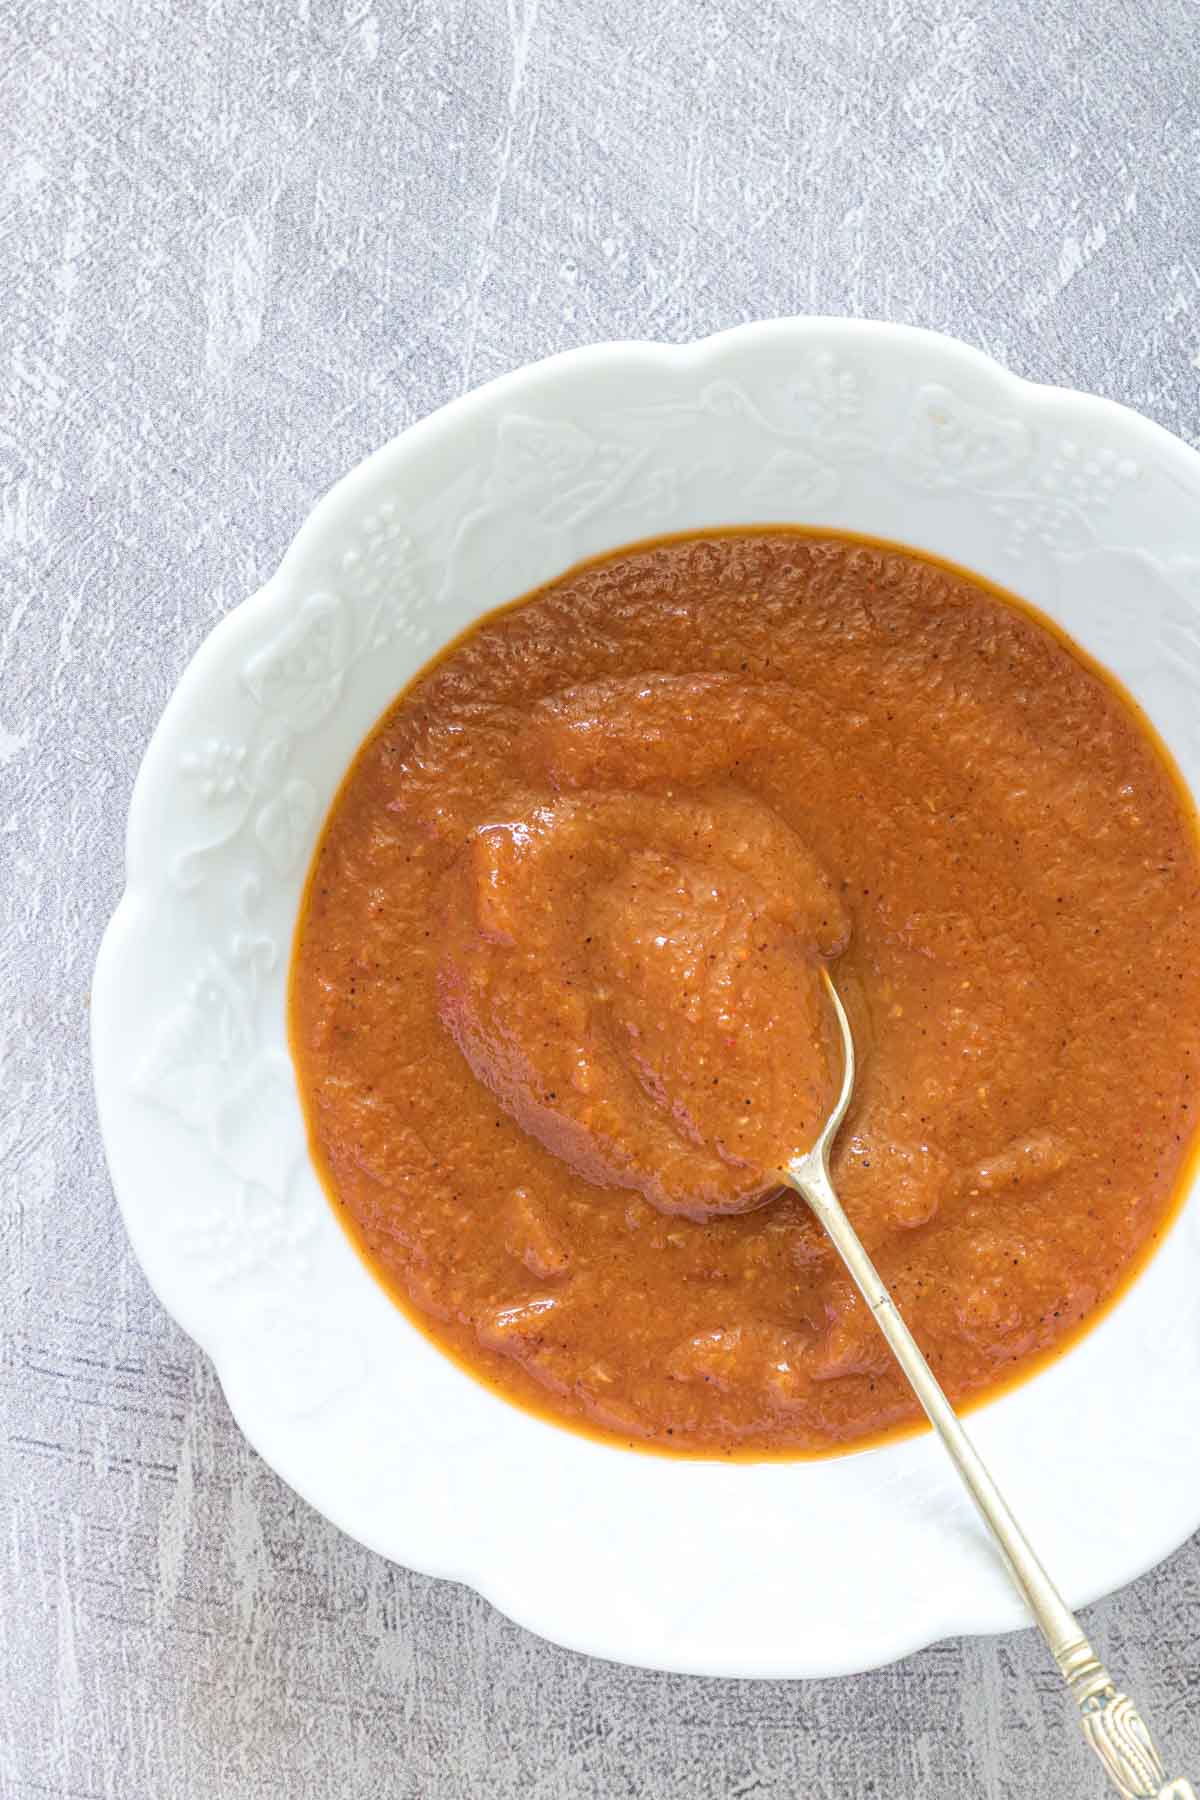 A bowl full of homemade tomato ketchup with a spoon